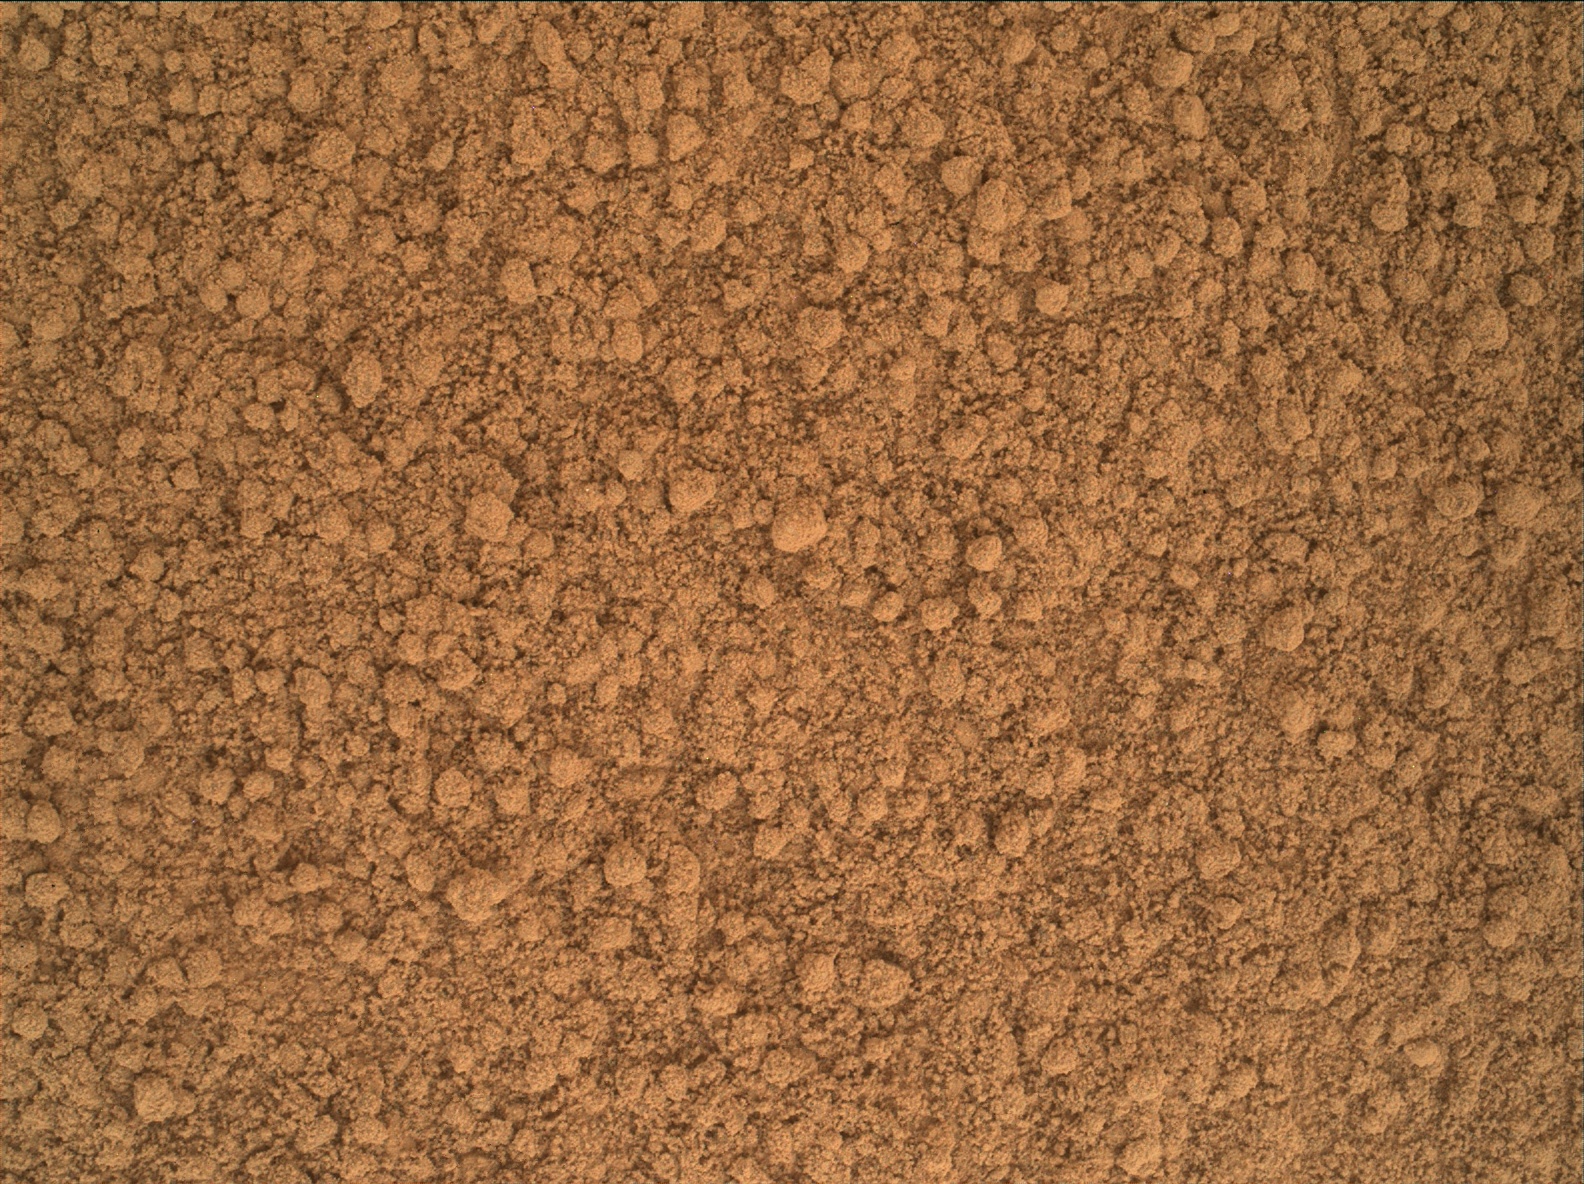 Nasa's Mars rover Curiosity acquired this image using its Mars Hand Lens Imager (MAHLI) on Sol 74